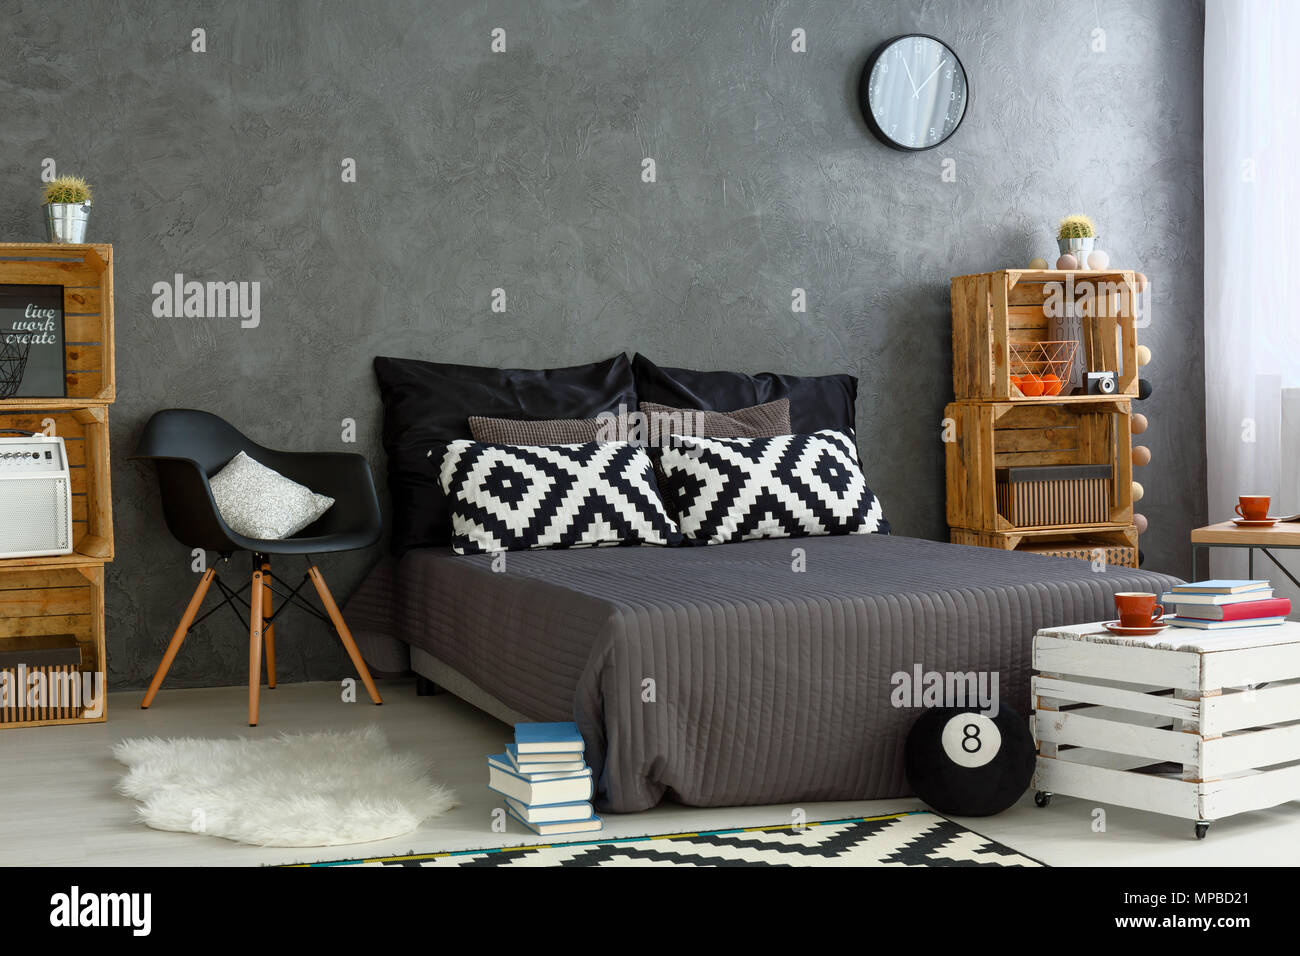 https://c8.alamy.com/comp/MPBD21/spacious-bedroom-in-grey-with-handmade-wood-furniture-big-bed-and-decorative-pattern-pillows-MPBD21.jpg